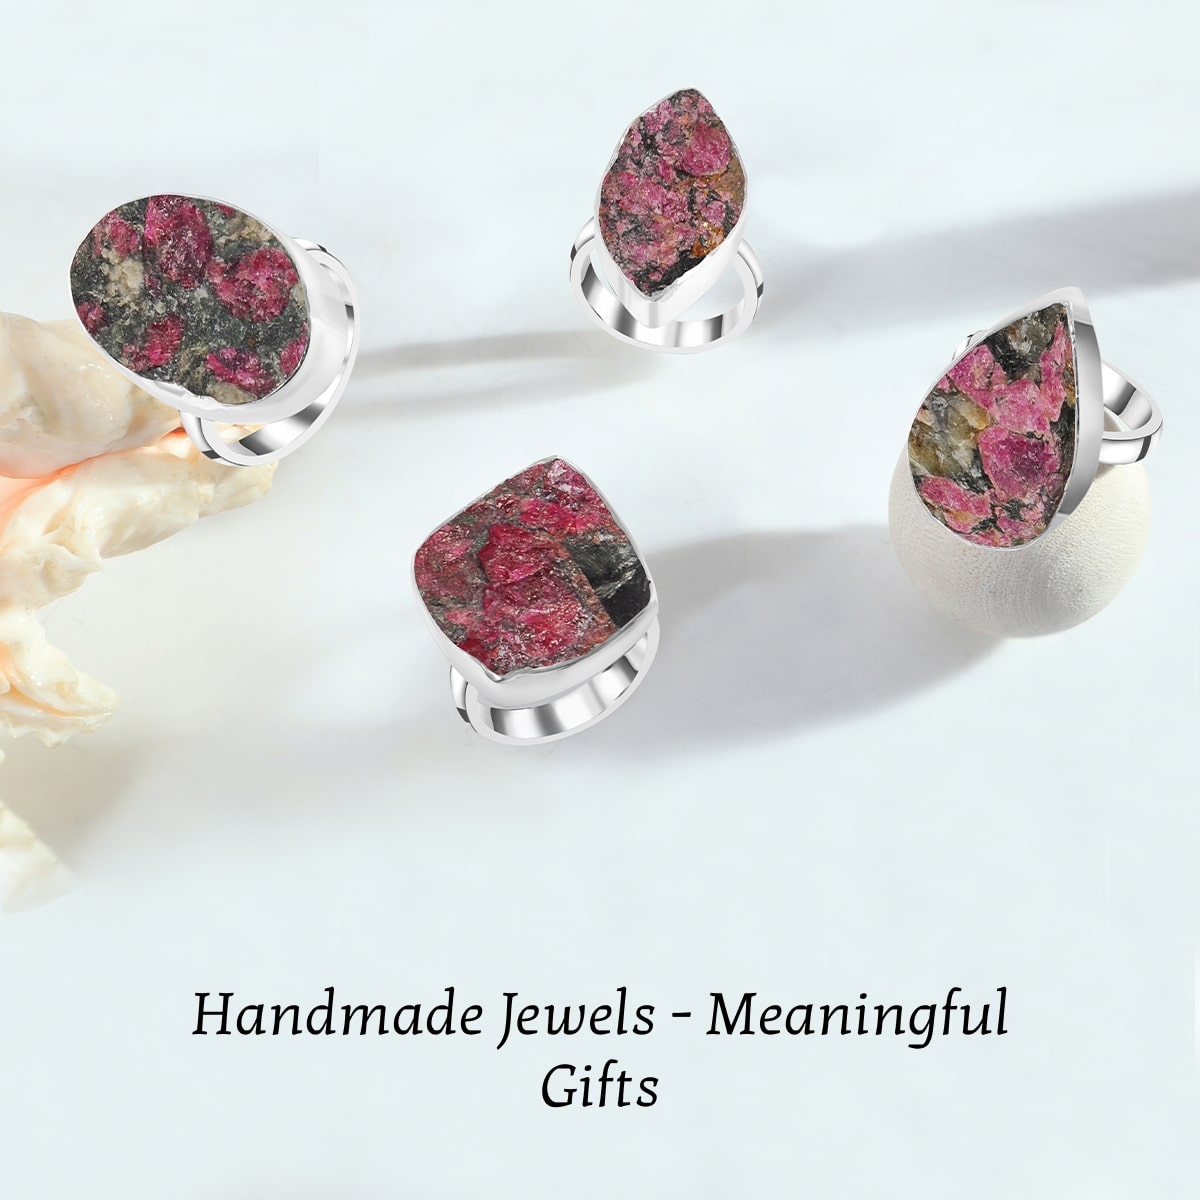 Reasons you should give Handmade Jewelry